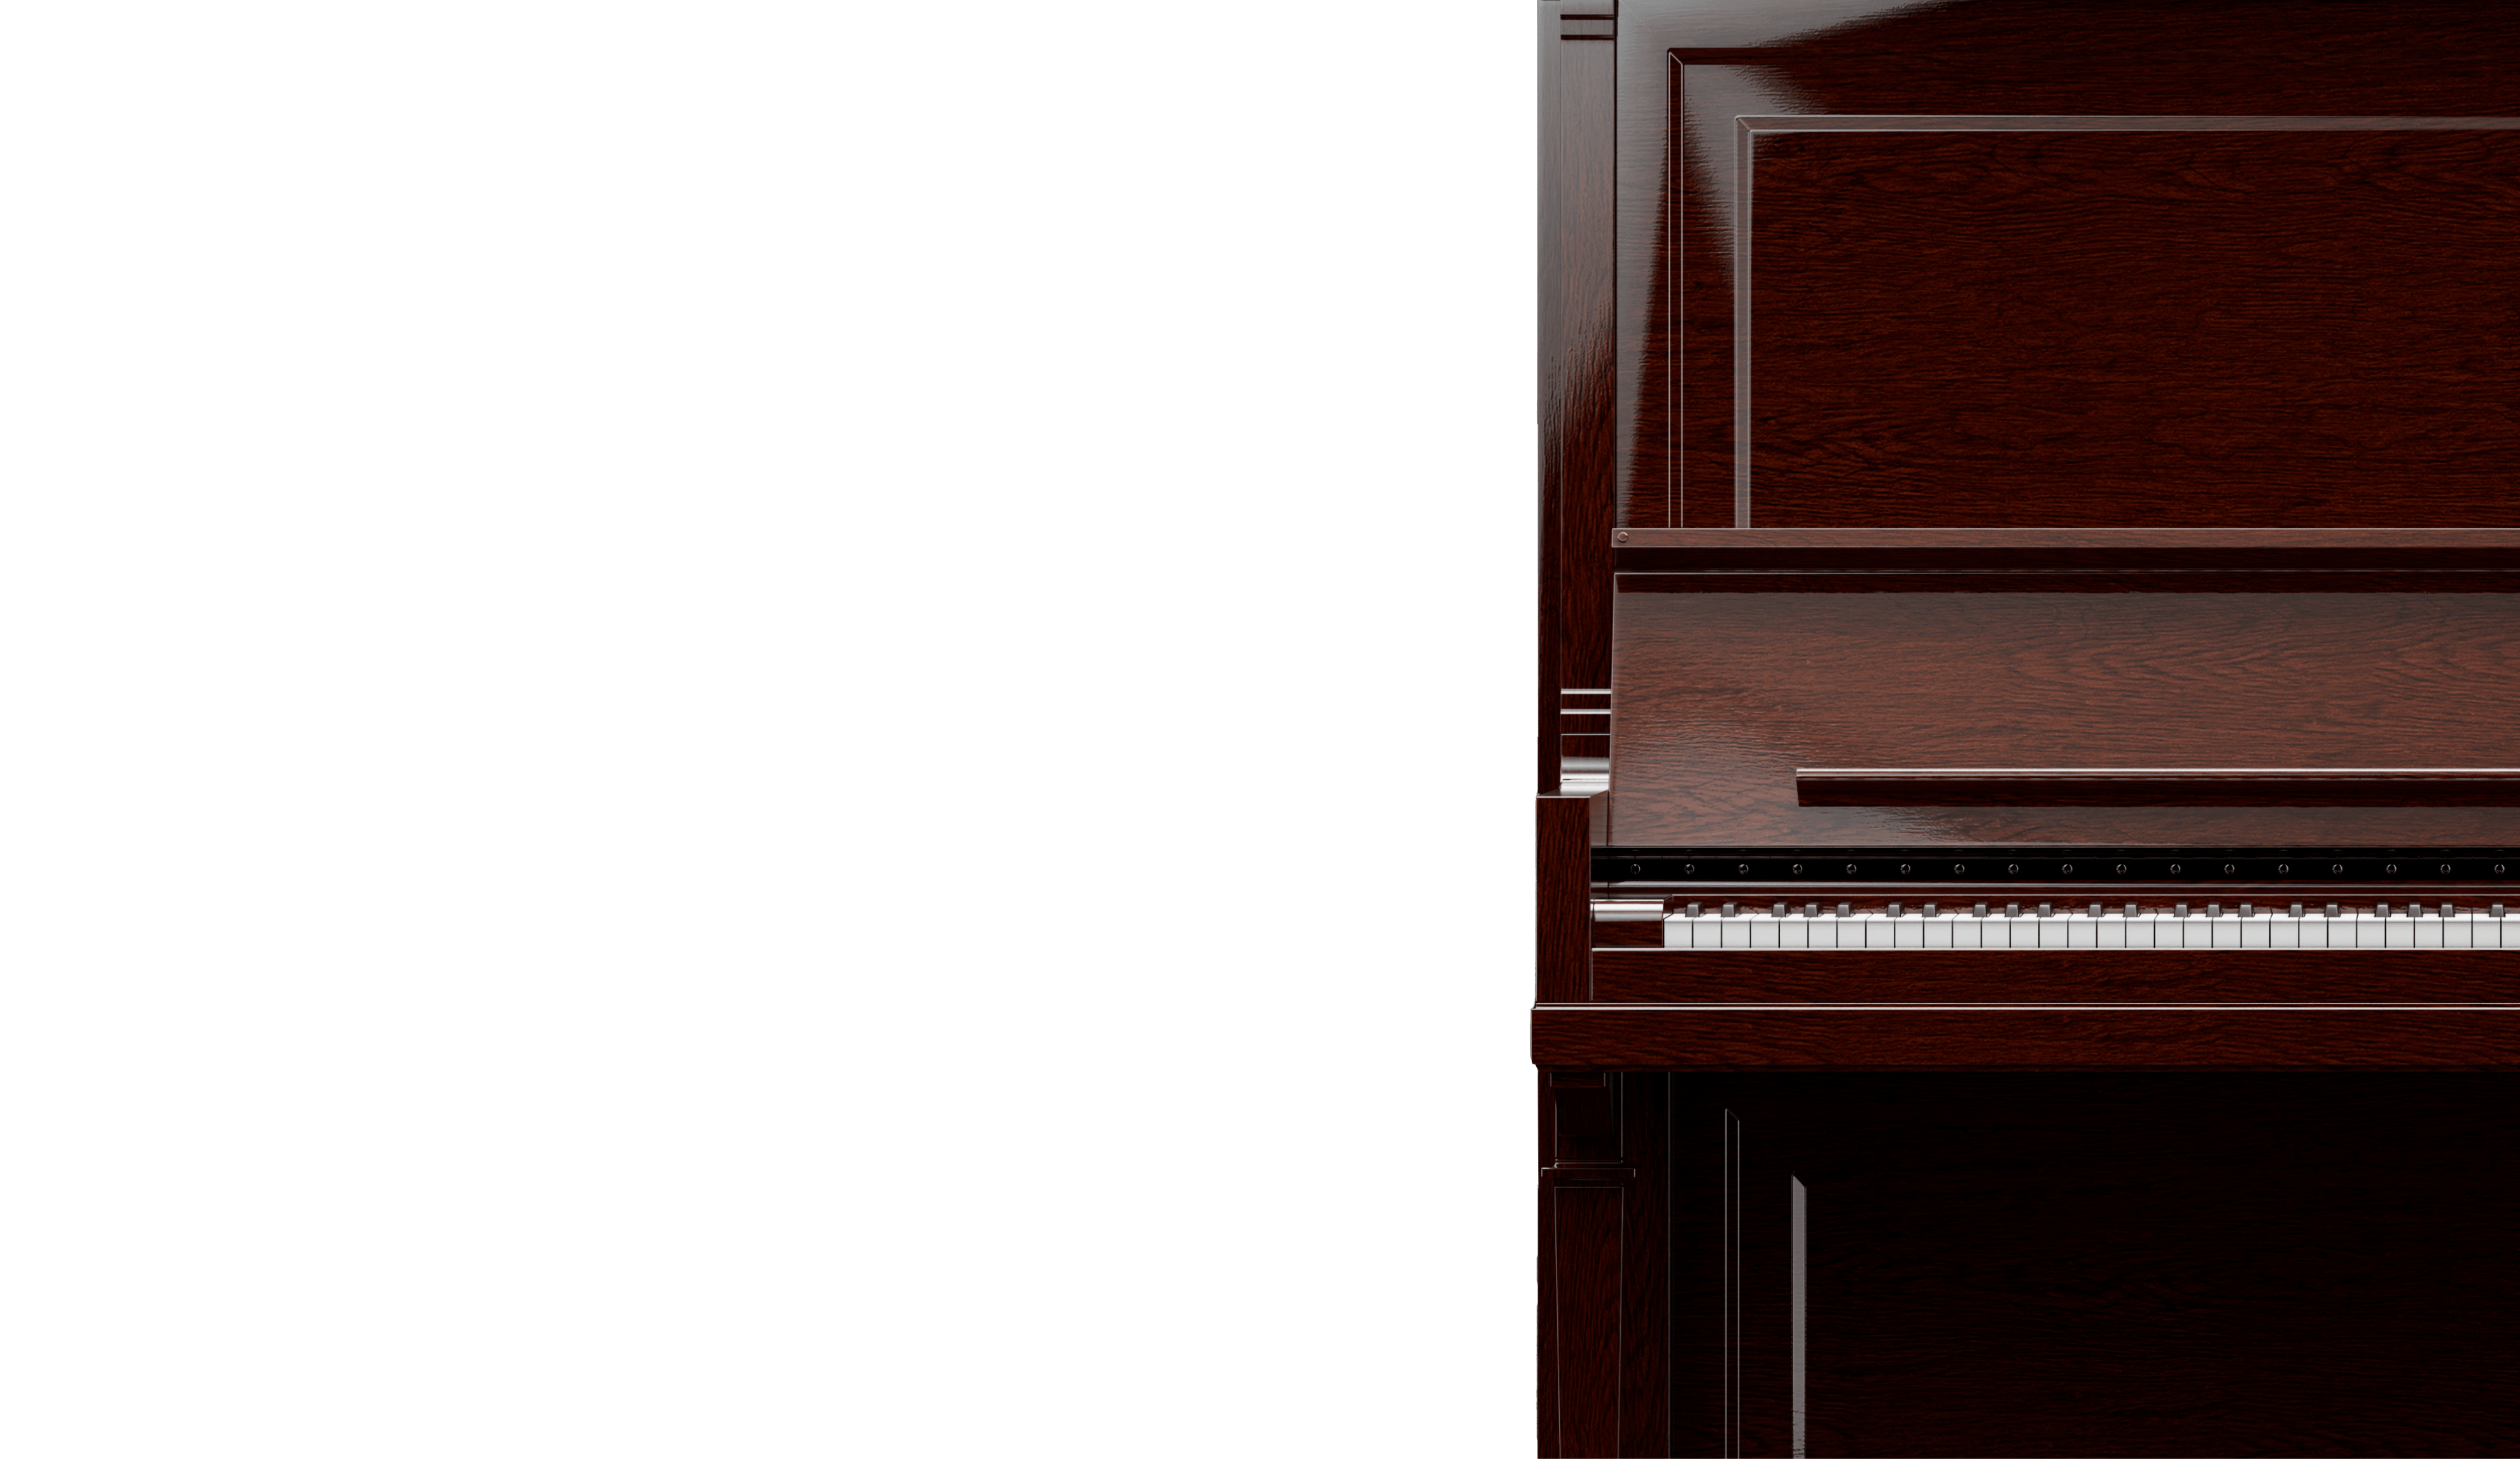 ALSO CHECK OUT THE 1901 UPRIGHT PIANO